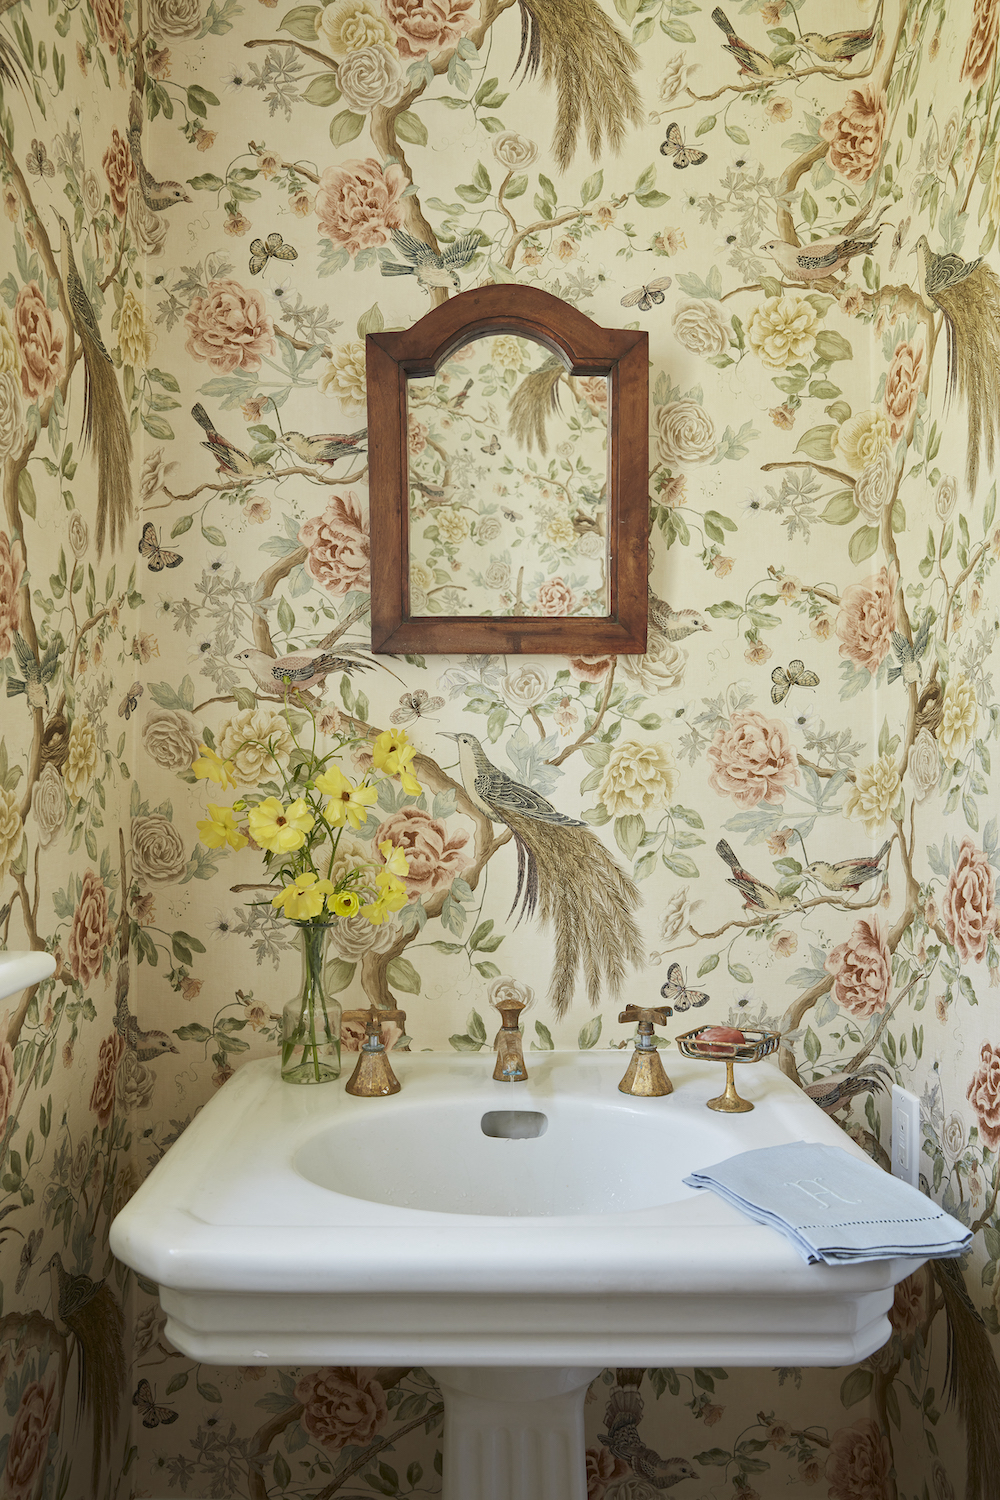 Image caption: The Travers - Garden Club collection in a quaint bathroom. | IMage credit: Zimmer + Rohde